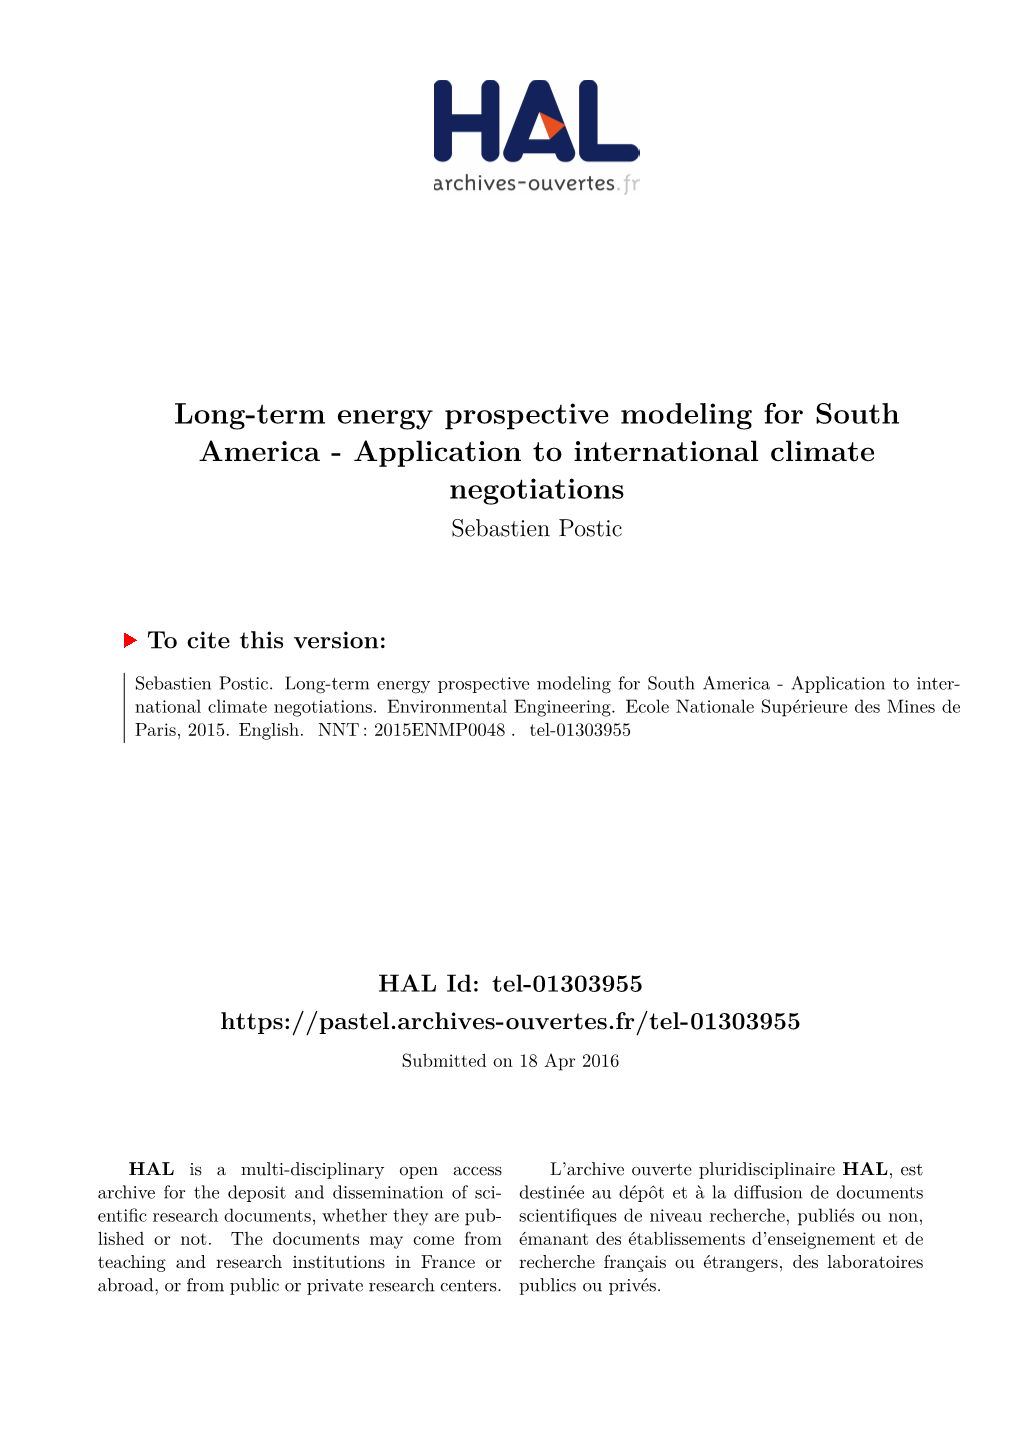 Long-Term Energy Prospective Modeling for South America - Application to International Climate Negotiations Sebastien Postic